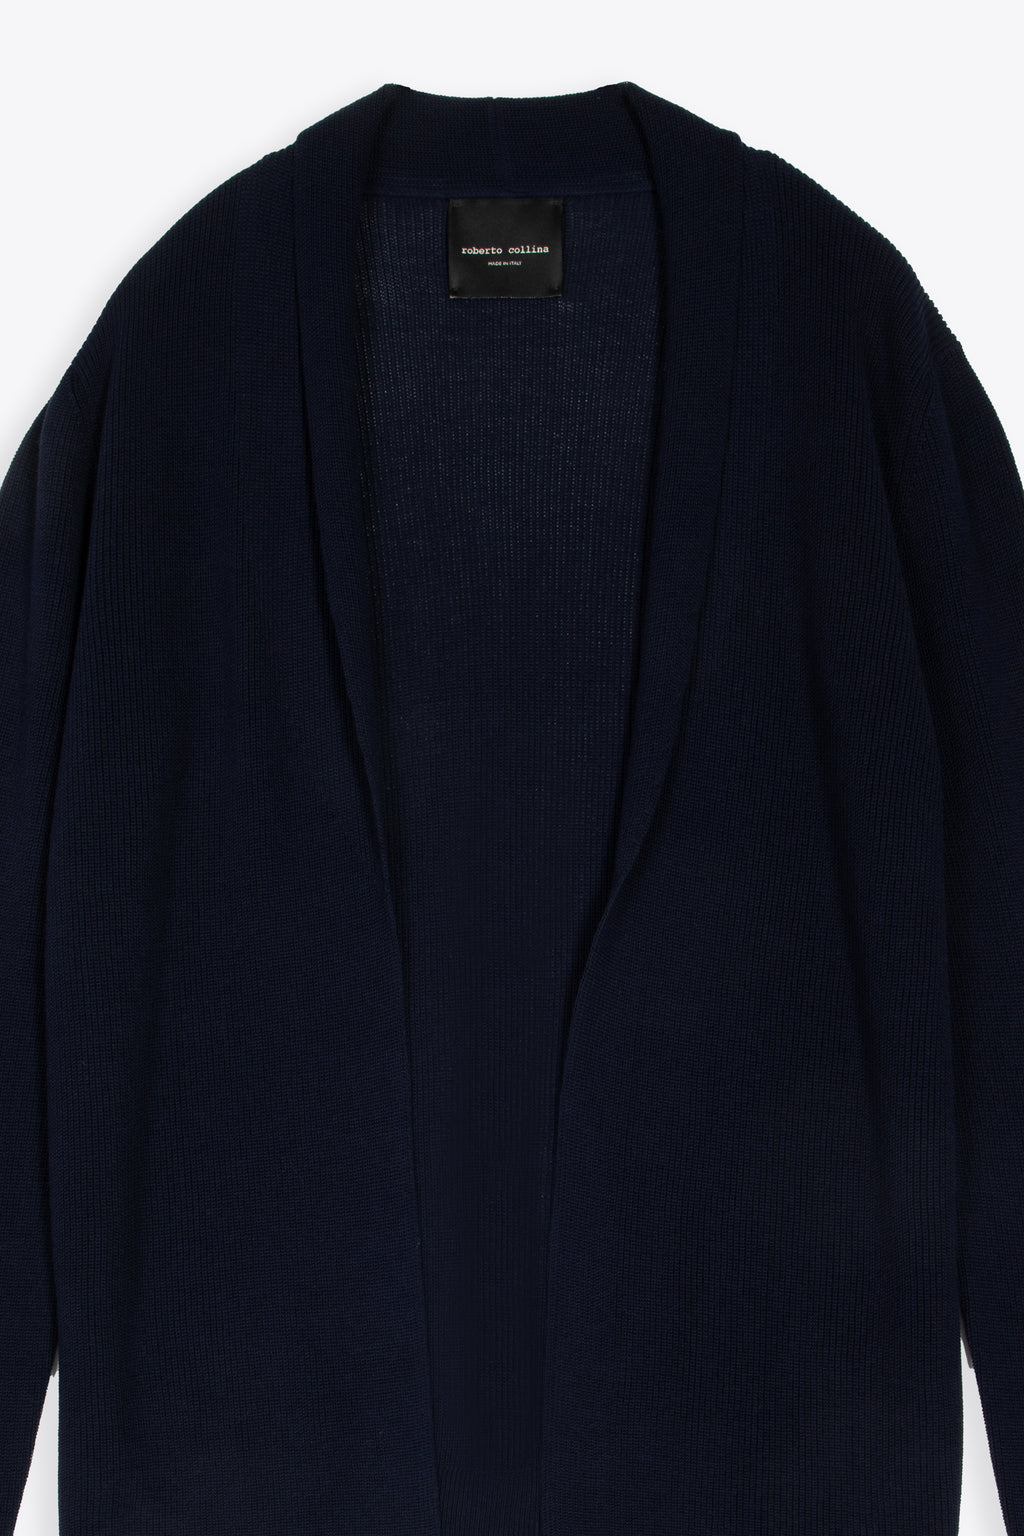 alt-image__Navy-blue-open-cardigan-with-shawl-collar